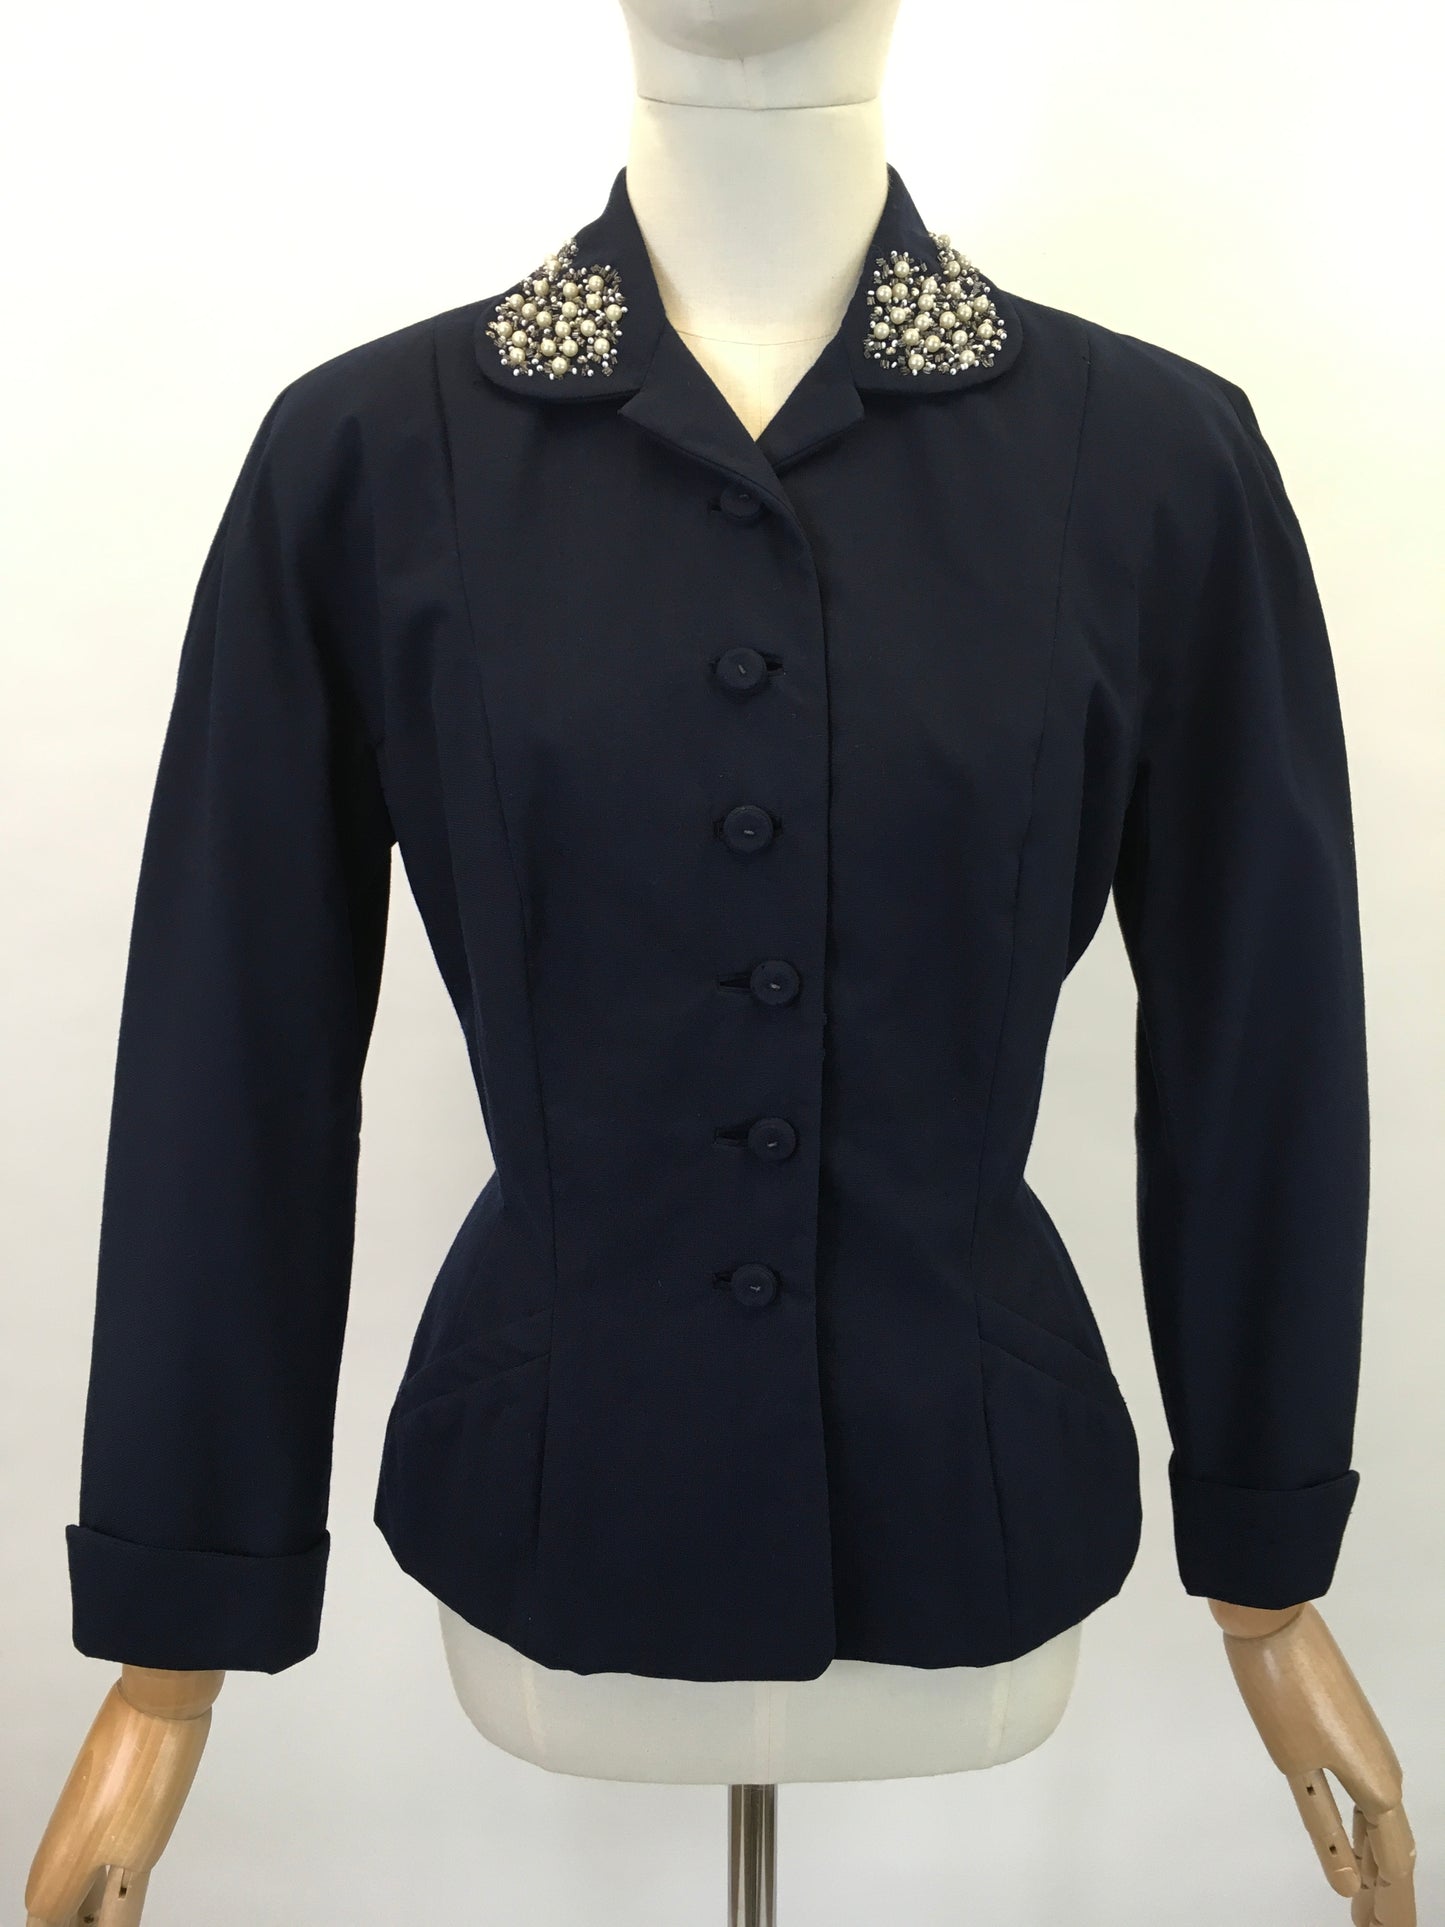 Original 1940’s NRA LABEL Navy Fitted Jacket - With Pearl & Beadwork Embelishment